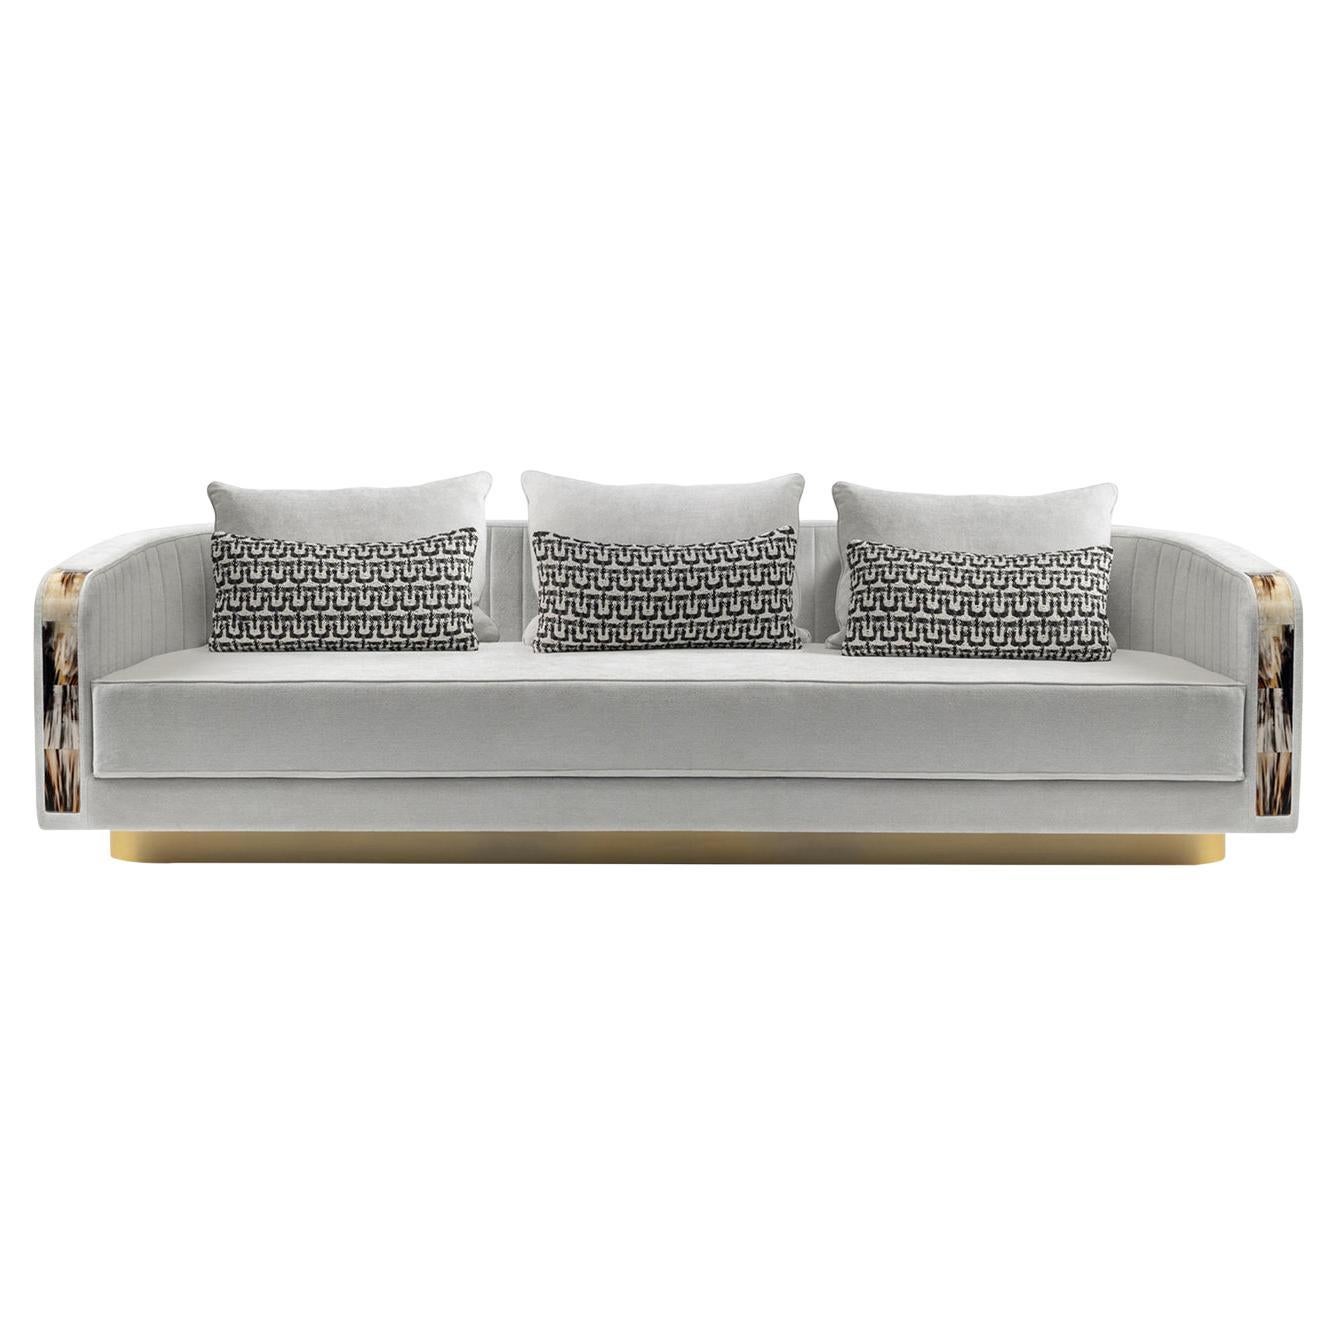 Afrodite 3-Seater Ivory Sofa with Horn Inlays